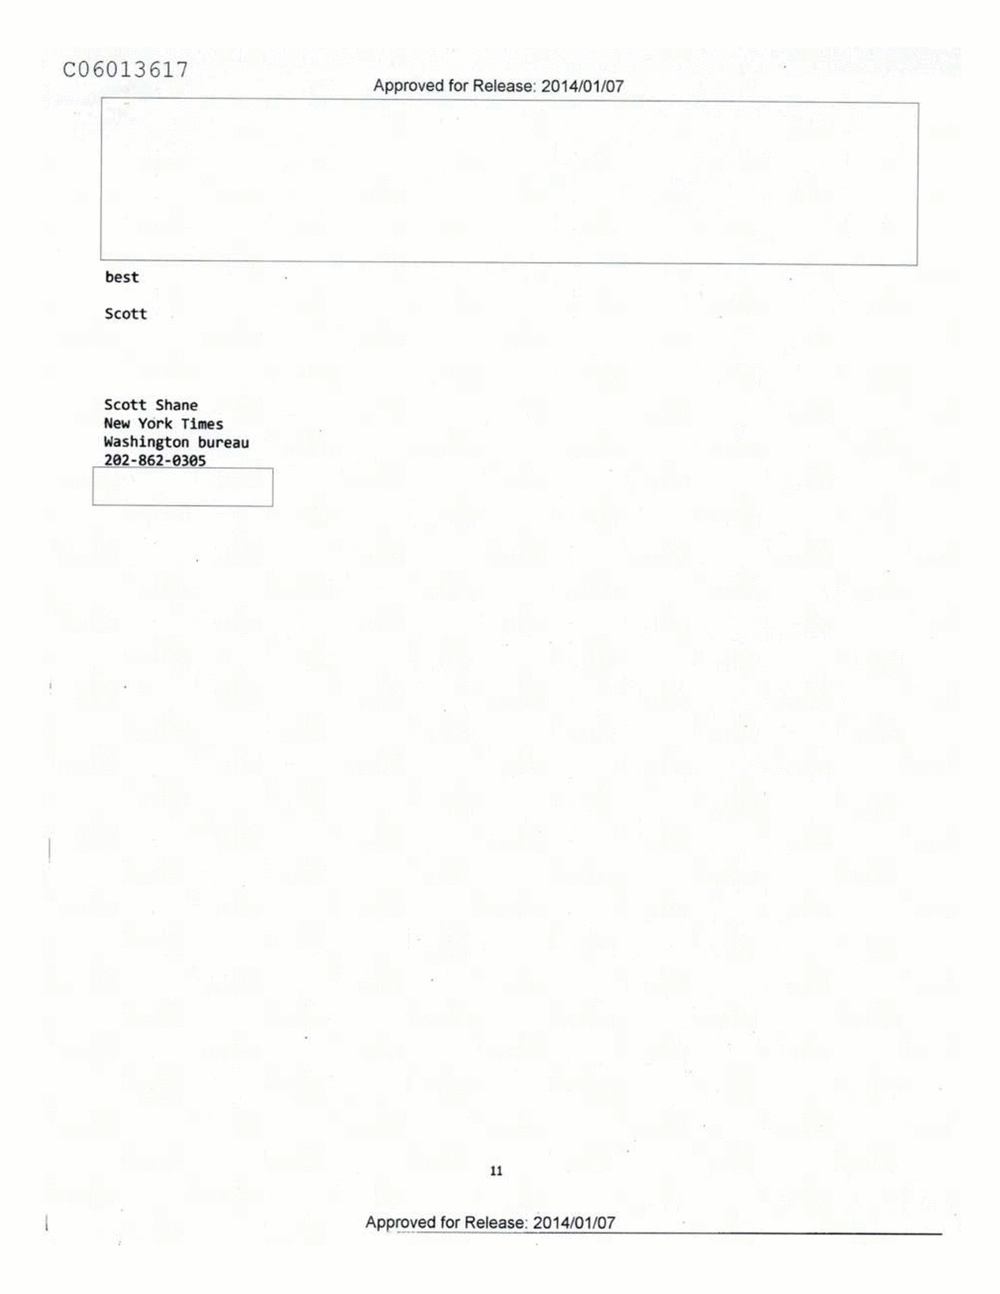 Page 447 from Email Correspondence Between Reporters and CIA Flacks